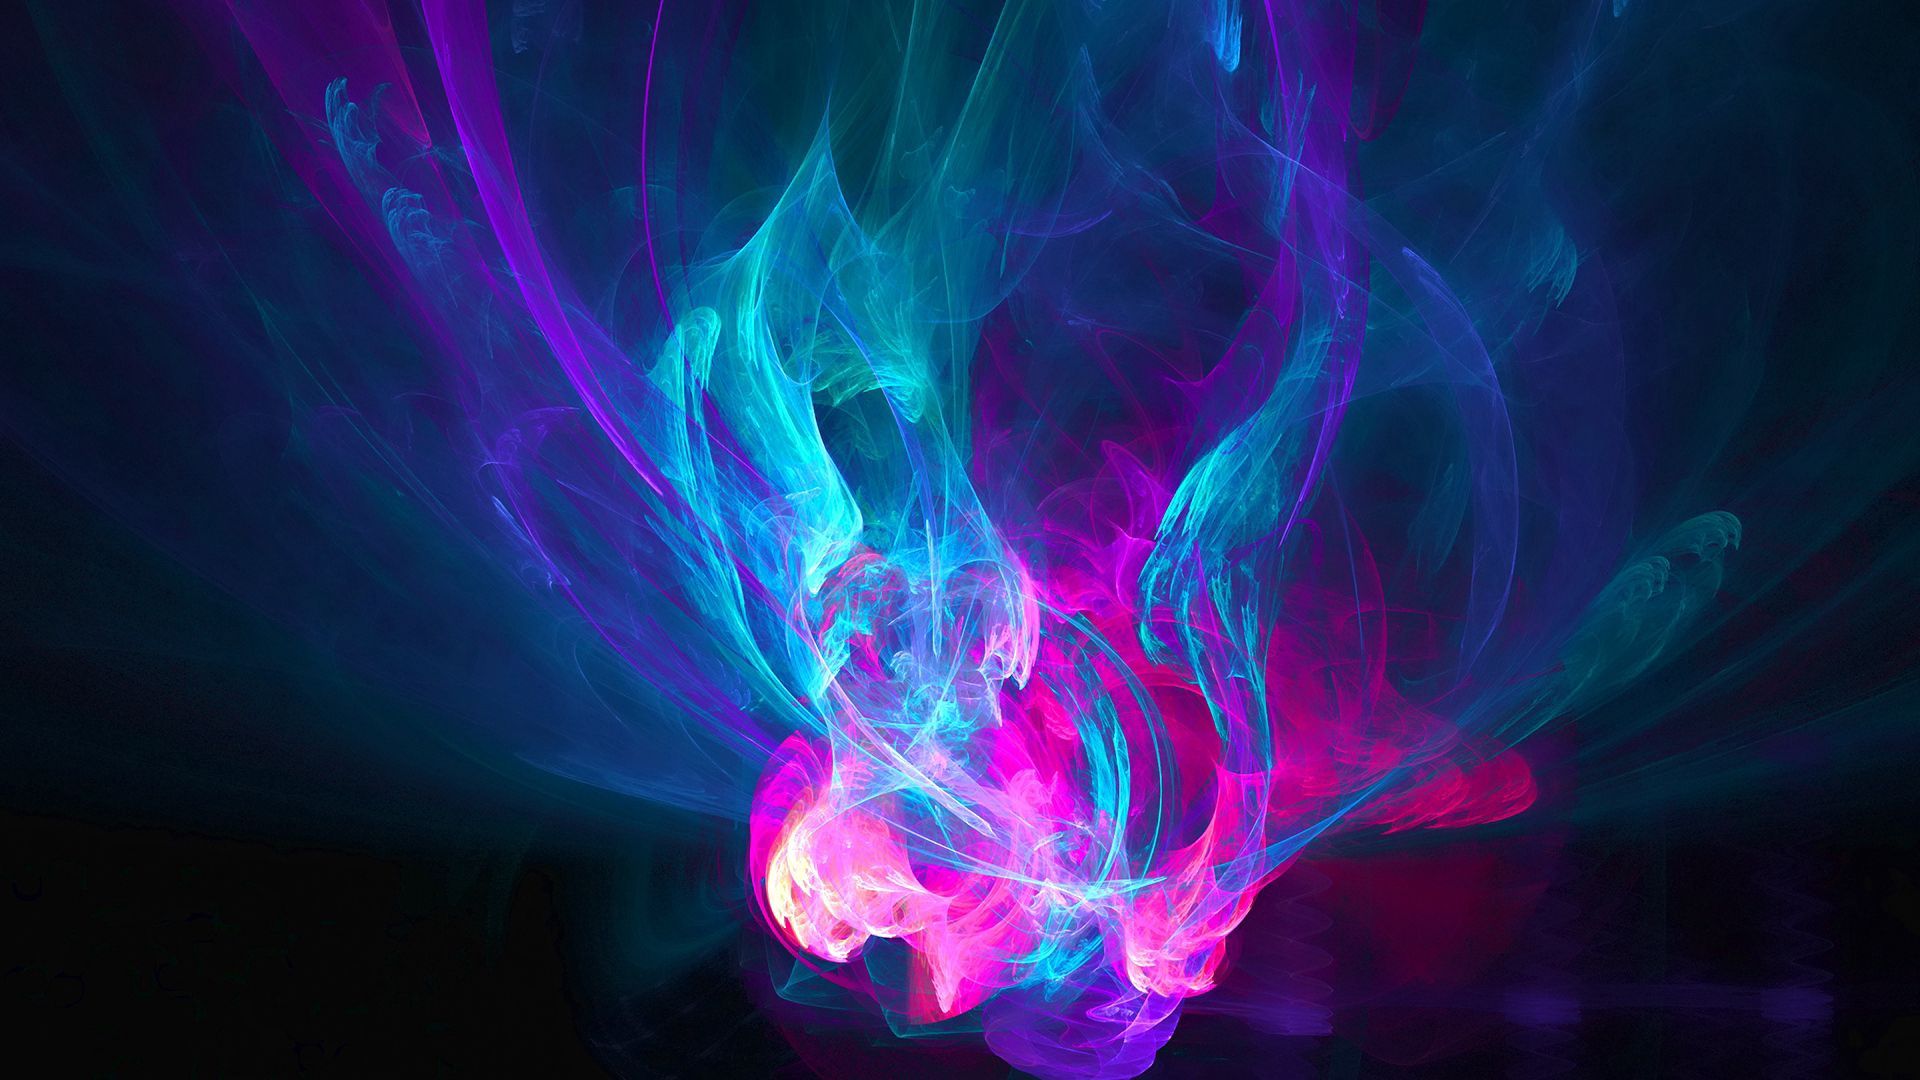 Download wallpaper 1920x1080 abstraction, light, pink, blue